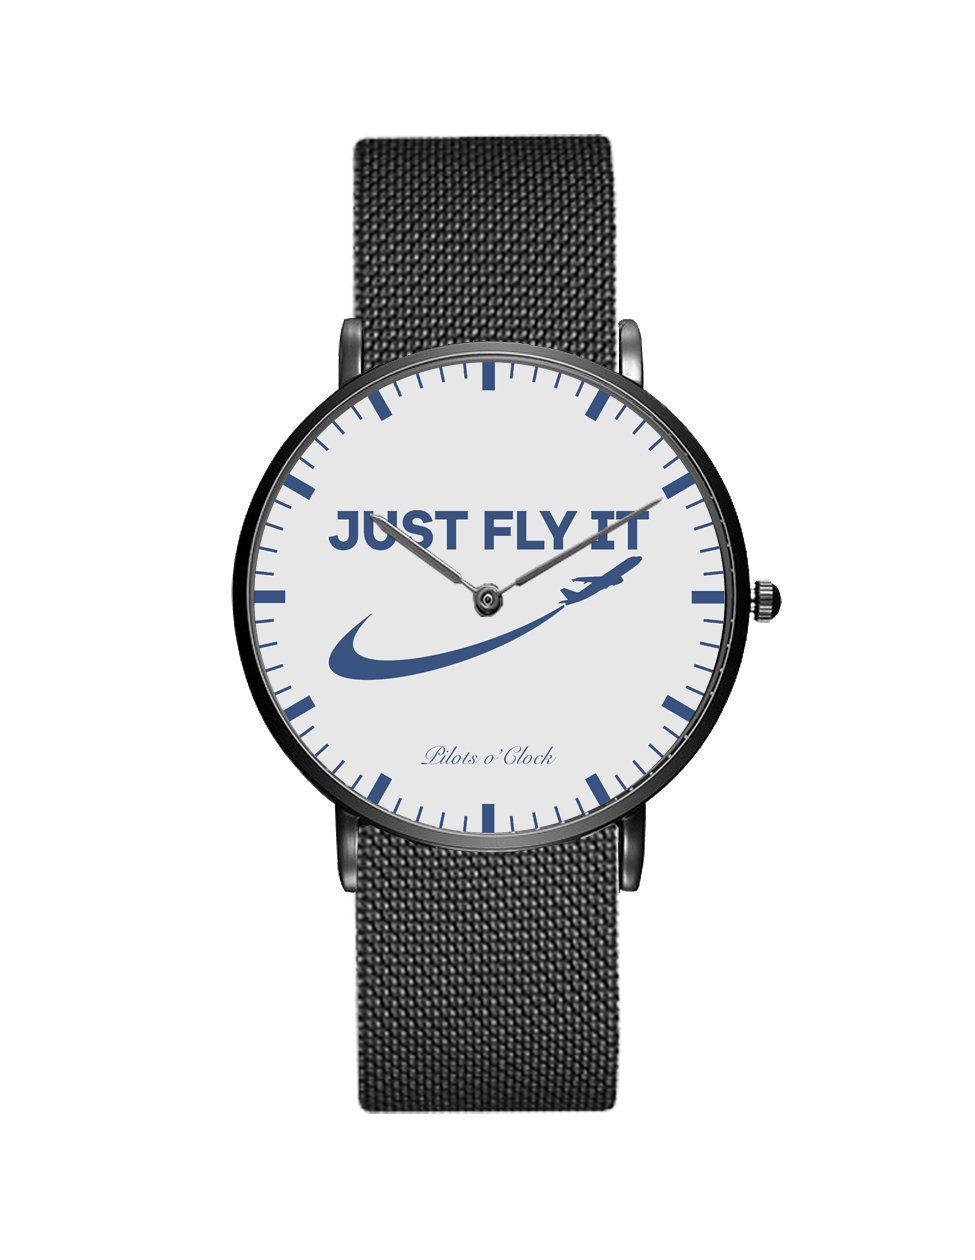 Just Fly It 2 Stainless Steel Strap Watches Pilot Eyes Store Black & Stainless Steel Strap 